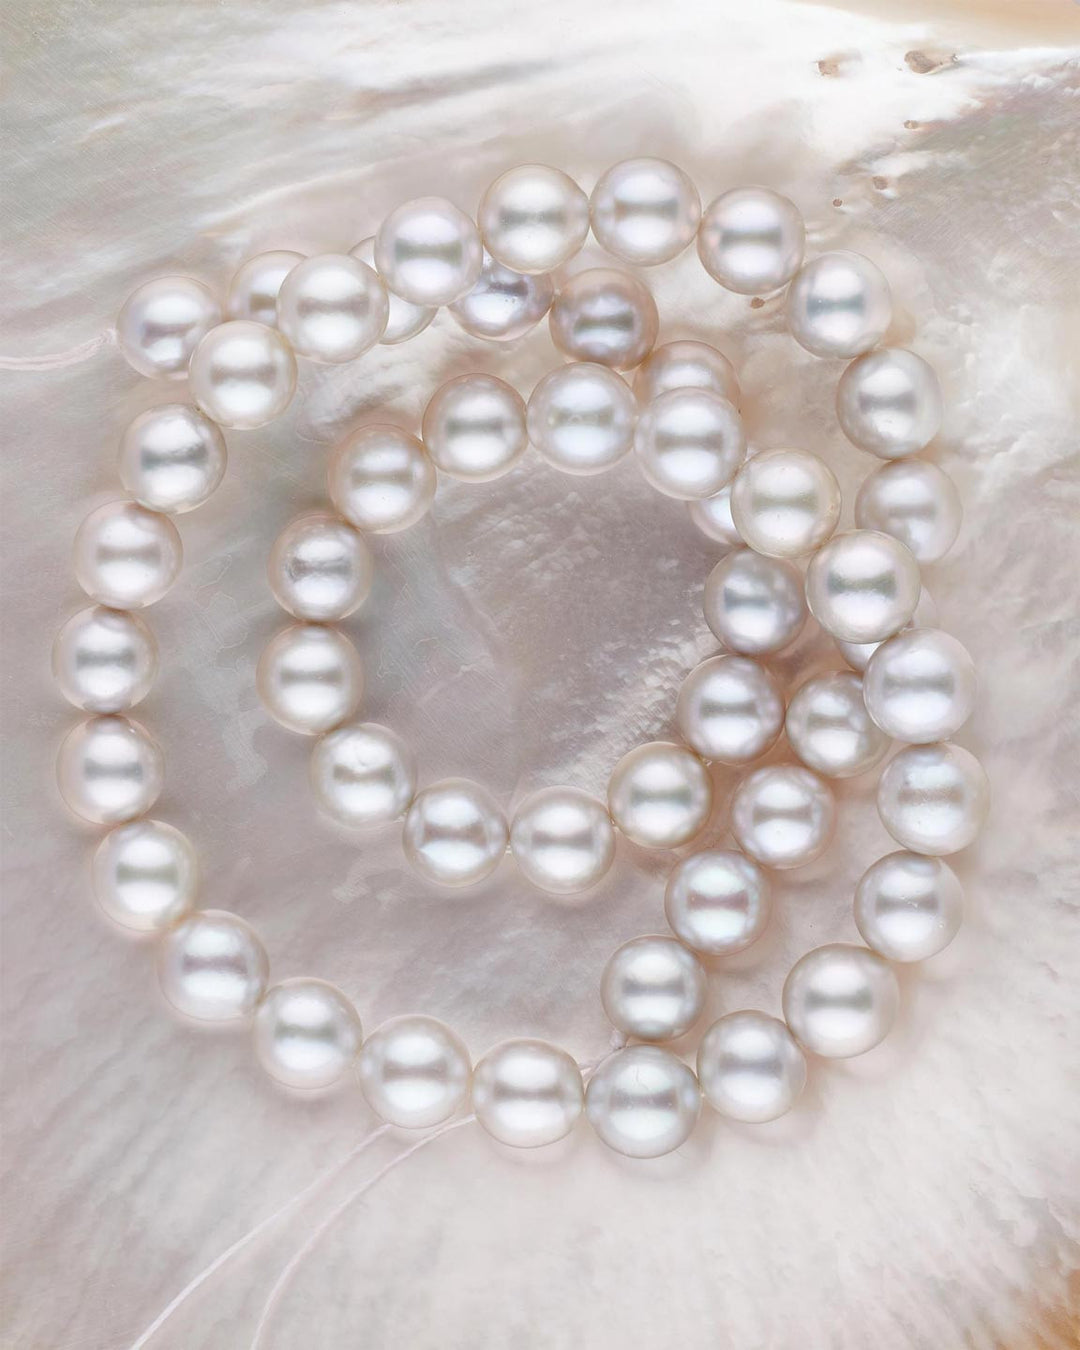 Red Sea Cultured Pearls: yes, they do exist